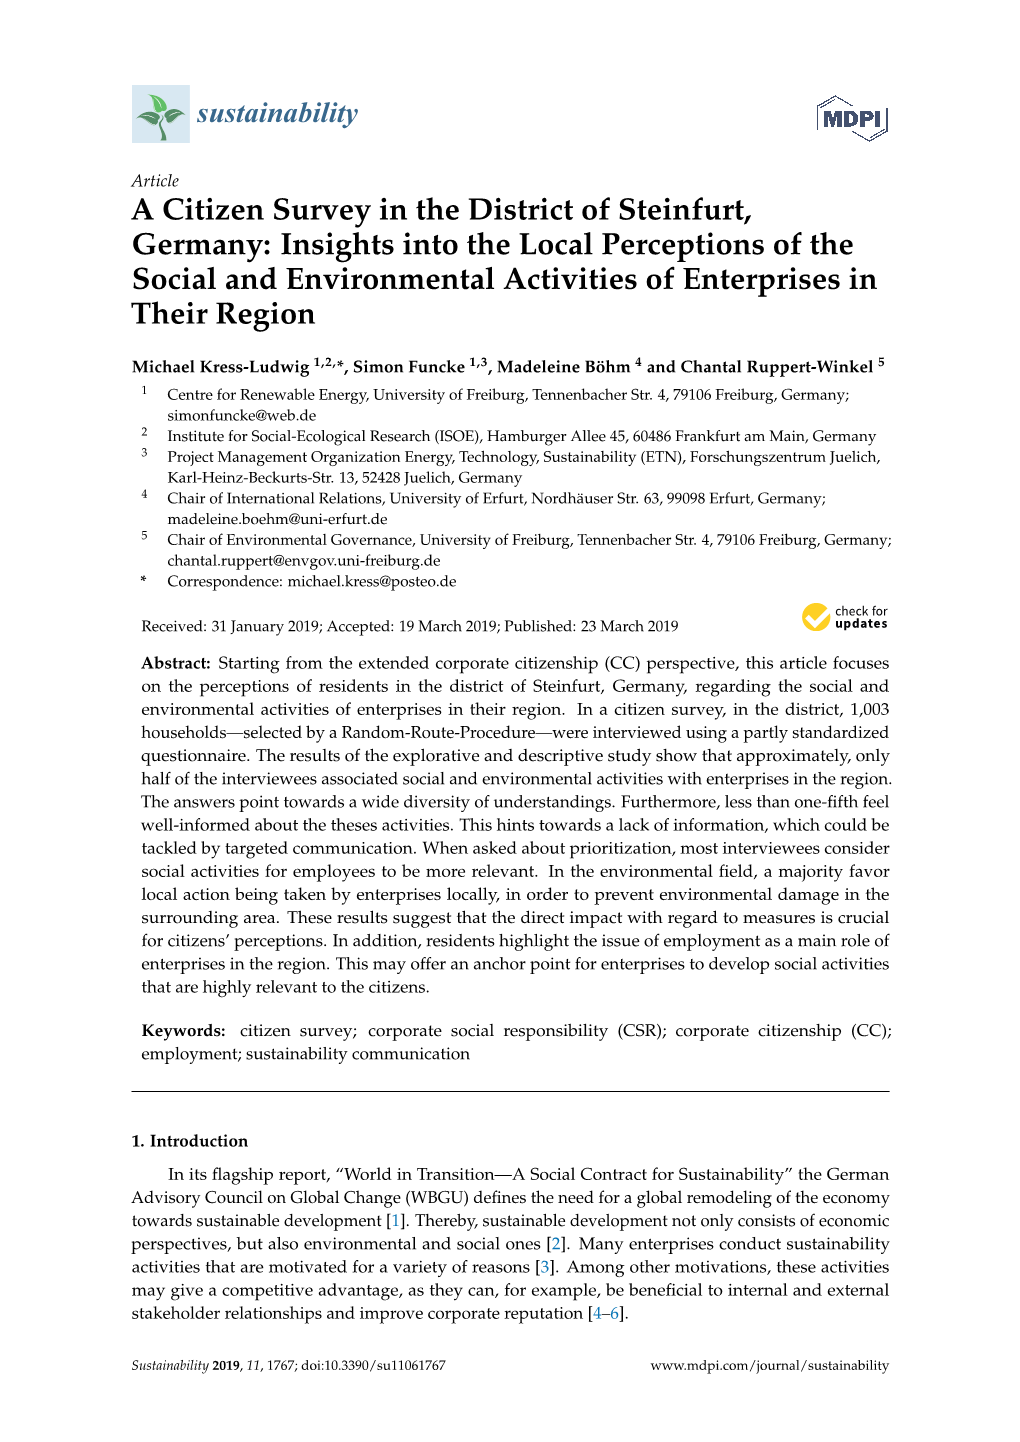 A Citizen Survey in the District of Steinfurt, Germany: Insights Into the Local Perceptions of the Social and Environmental Activities of Enterprises in Their Region